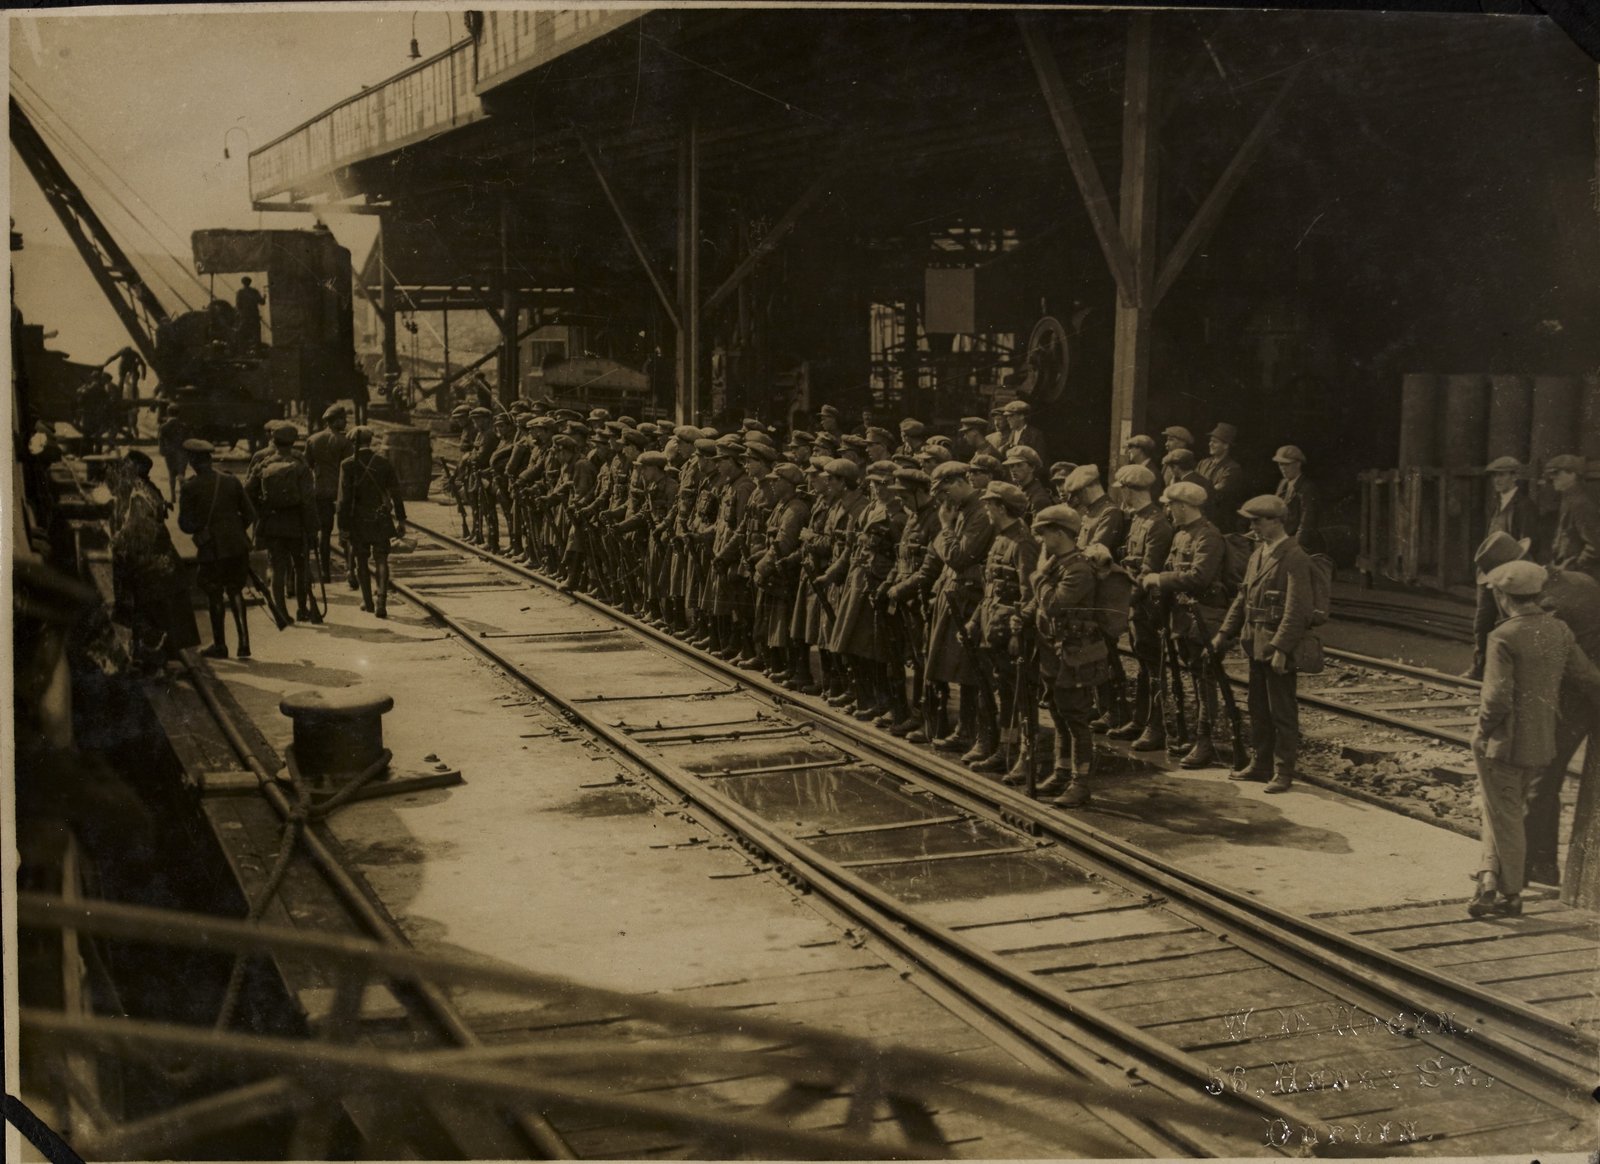 Image - Detachment of troops at Passage West about to start the march to Cork. Image courtesy of the National Library of Ireland